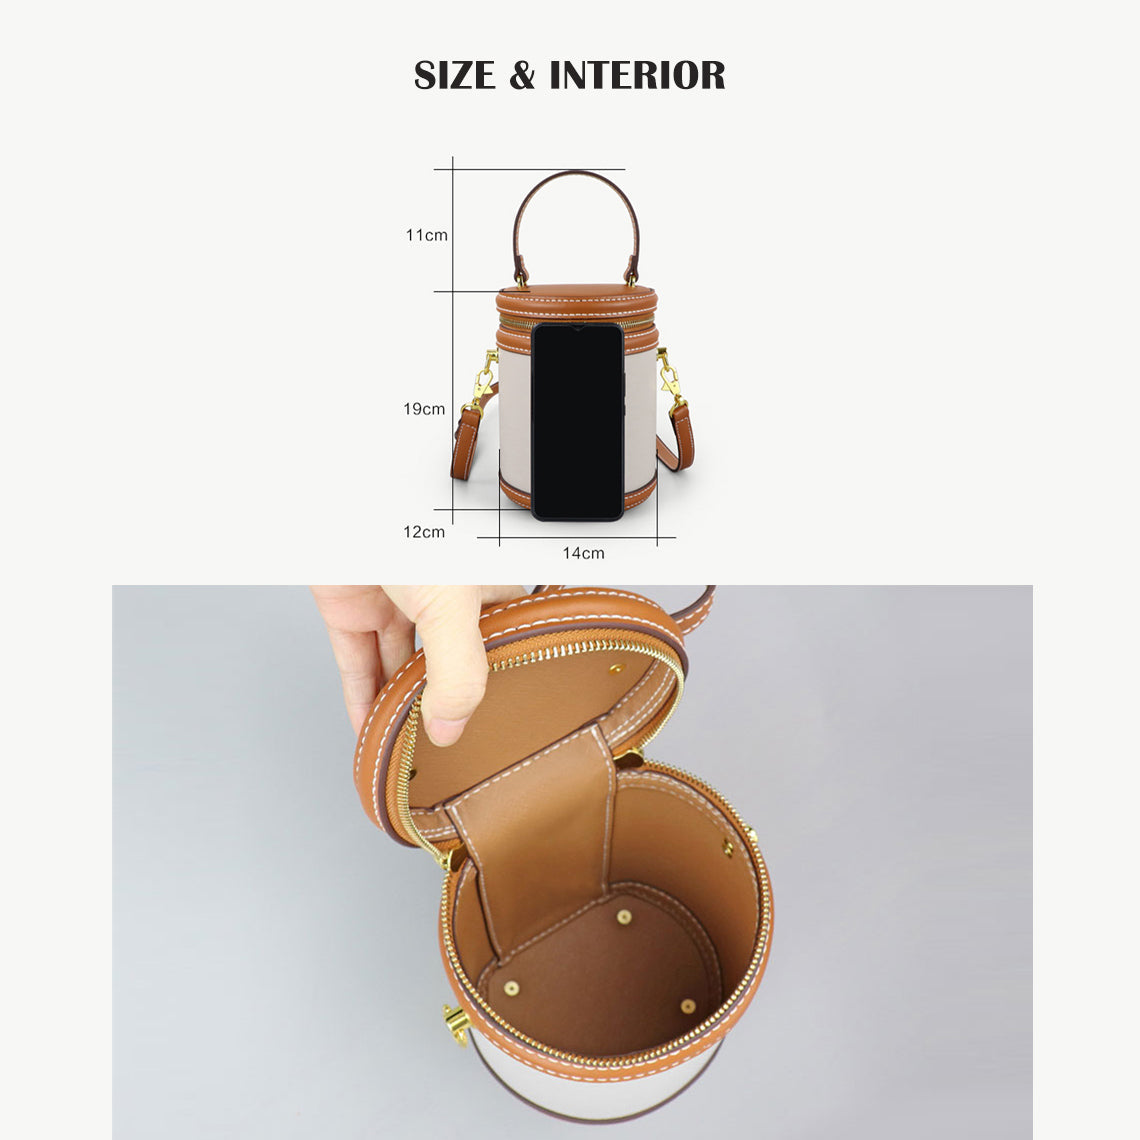 Leather Dustbag Recycle Round Bag DIY Kits